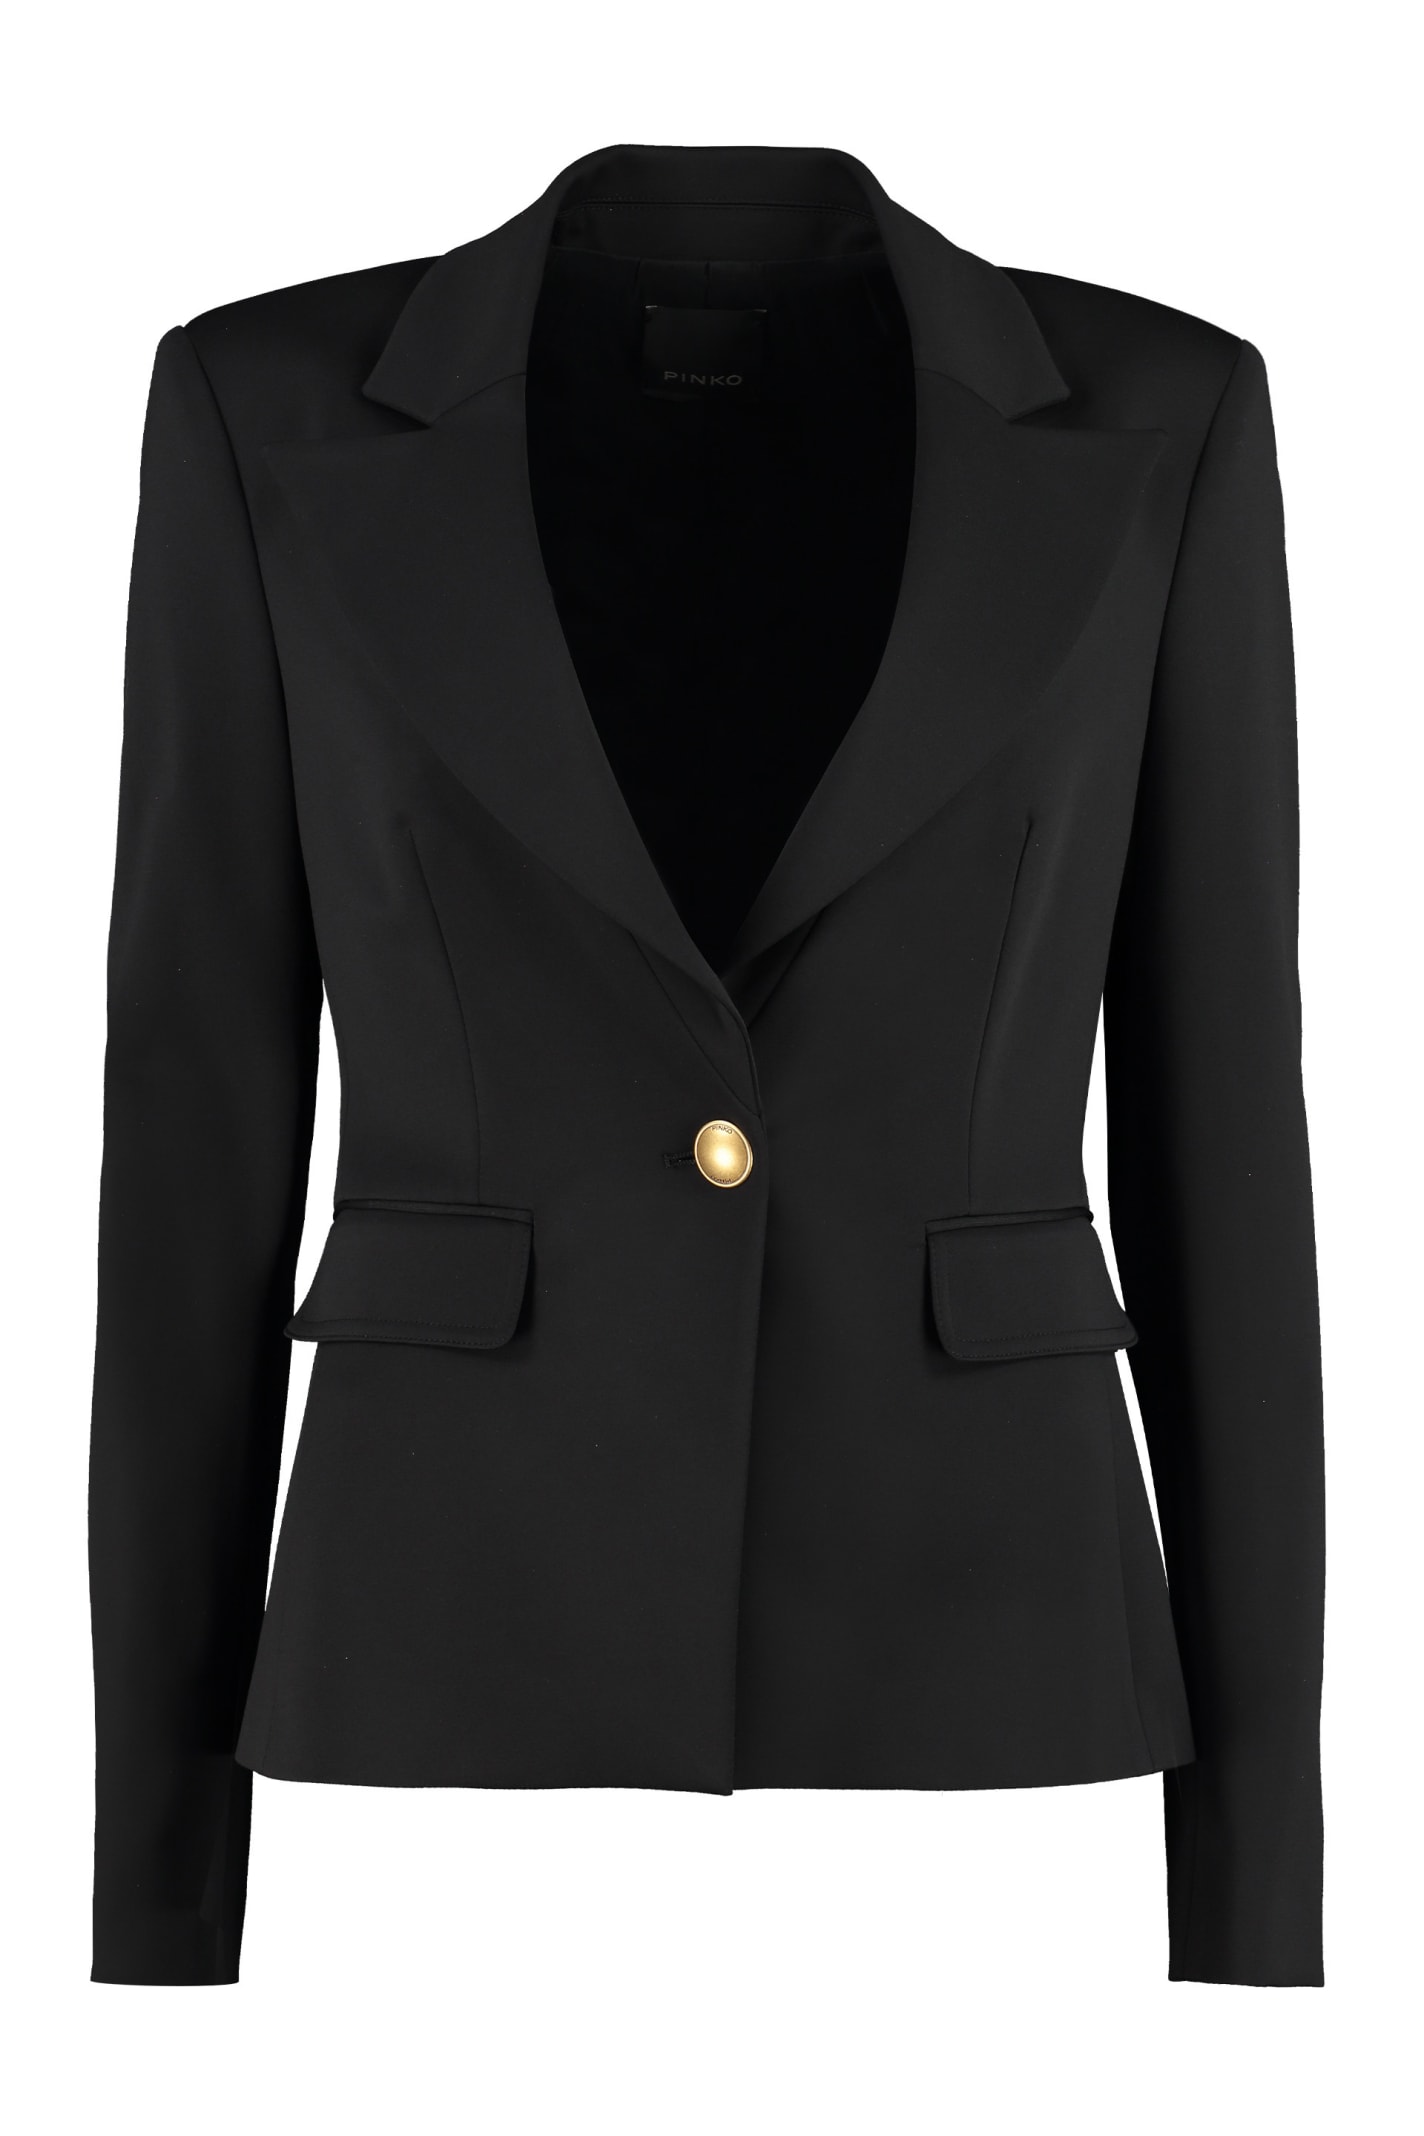 Pinko Gomberto Single-breasted One Button Jacket